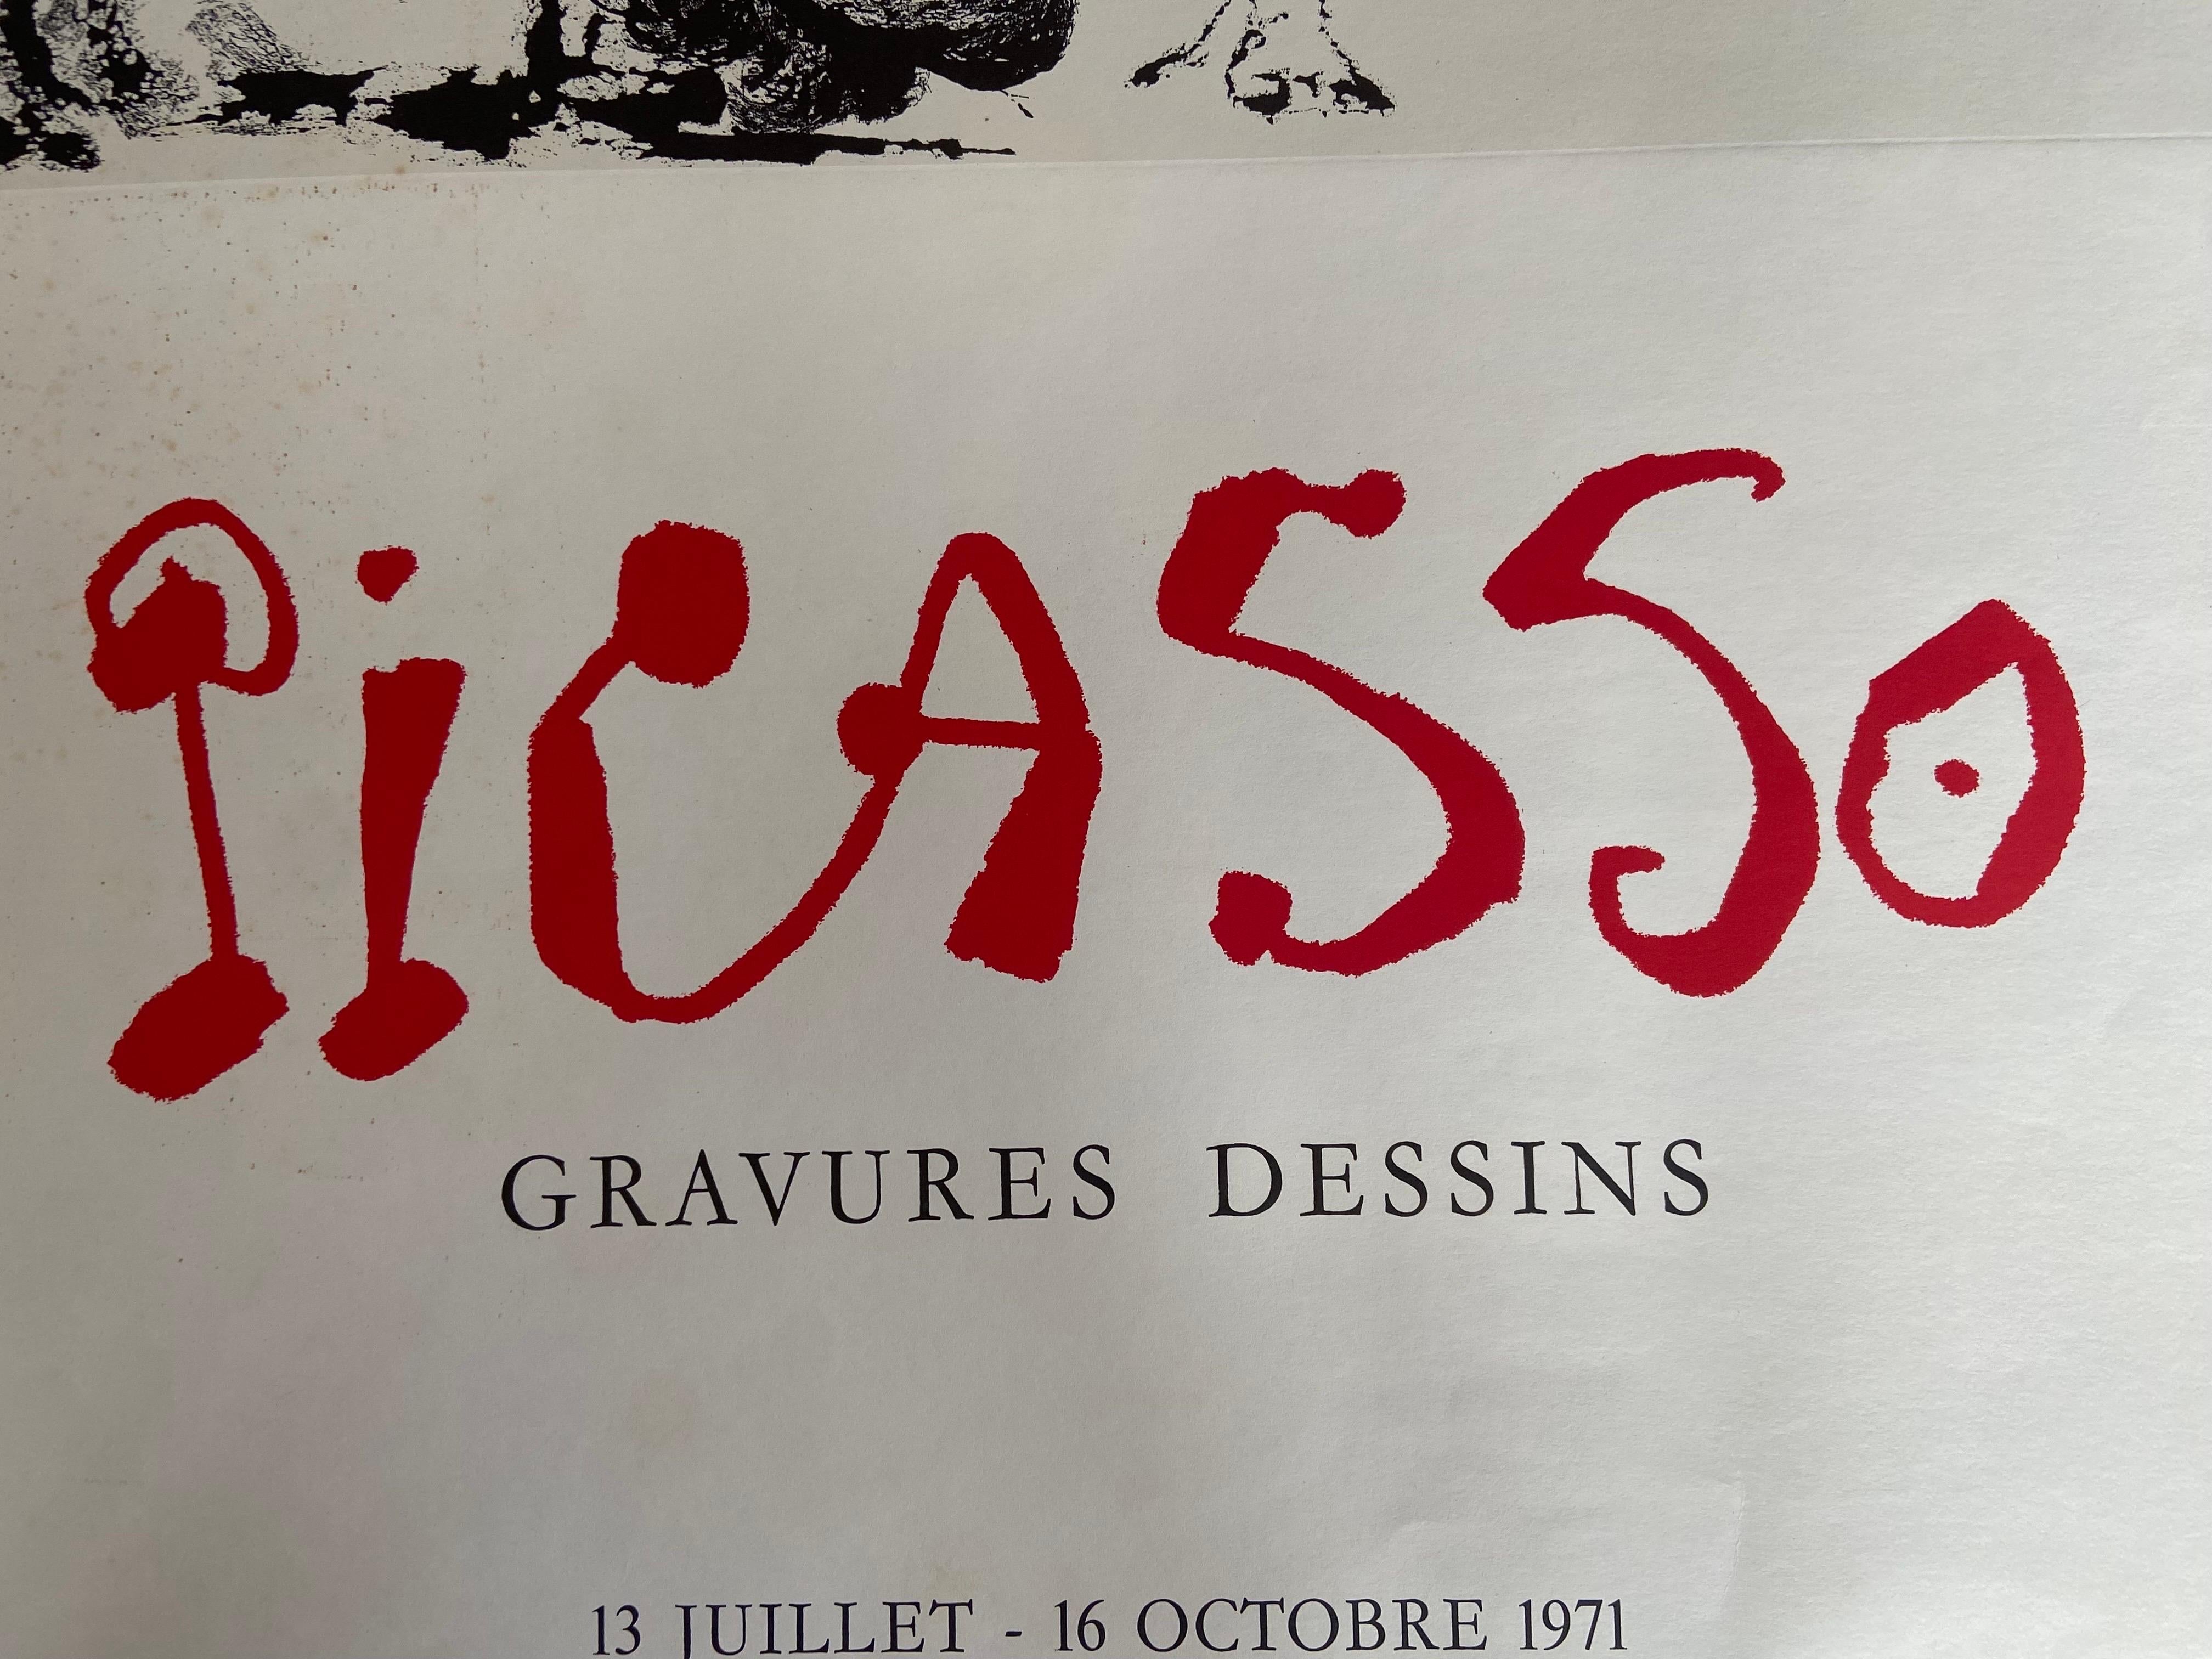 Swiss Original Poster for Picasso Exhibition in Geneva back in 1971 For Sale